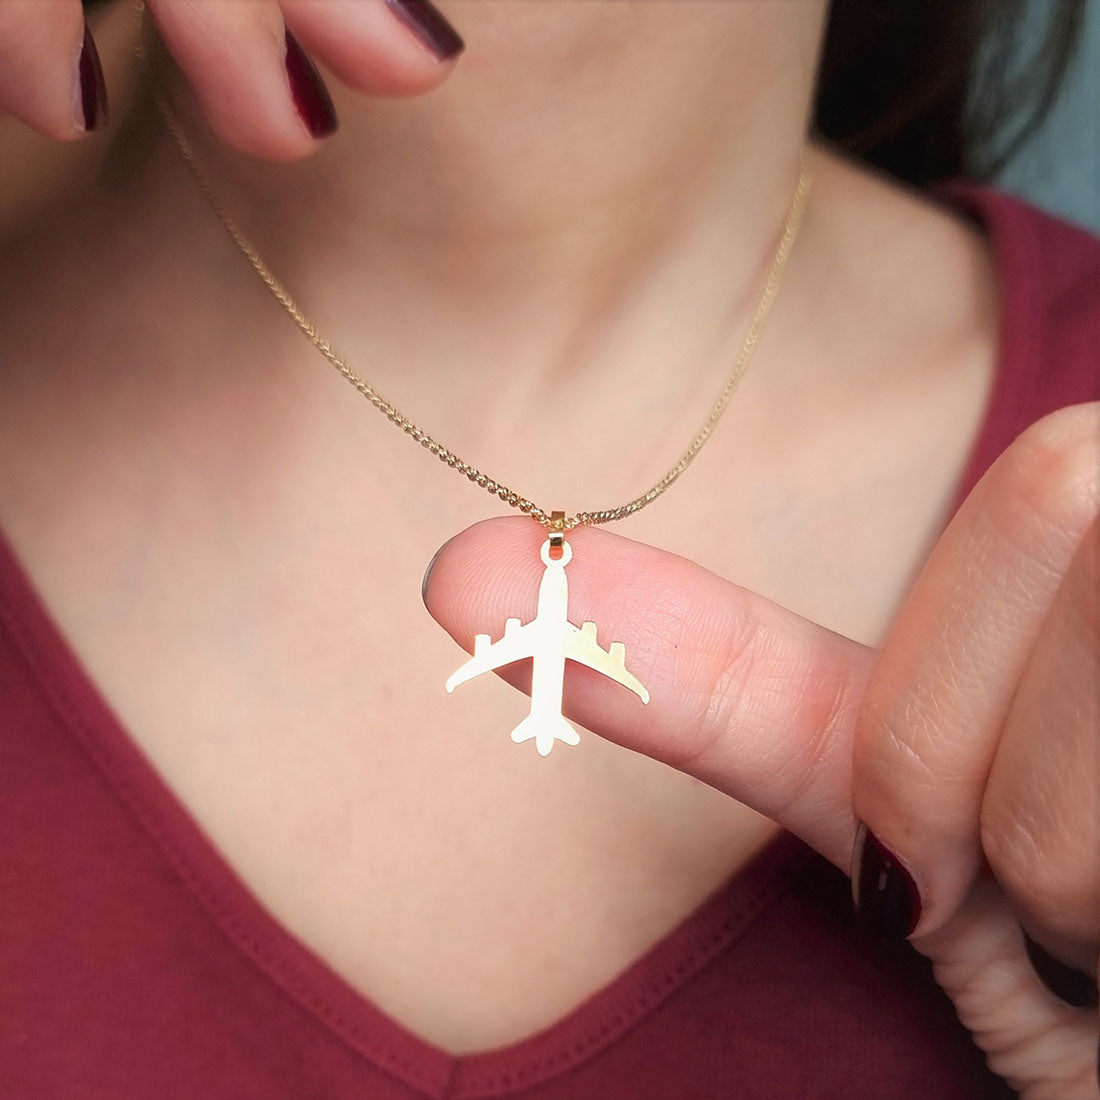 Gold Sliver Plane Necklace Airplane Pendant Necklace Aircraft Chain Layered  Necklace For Women Tiny Dainty Jewelry | Wish